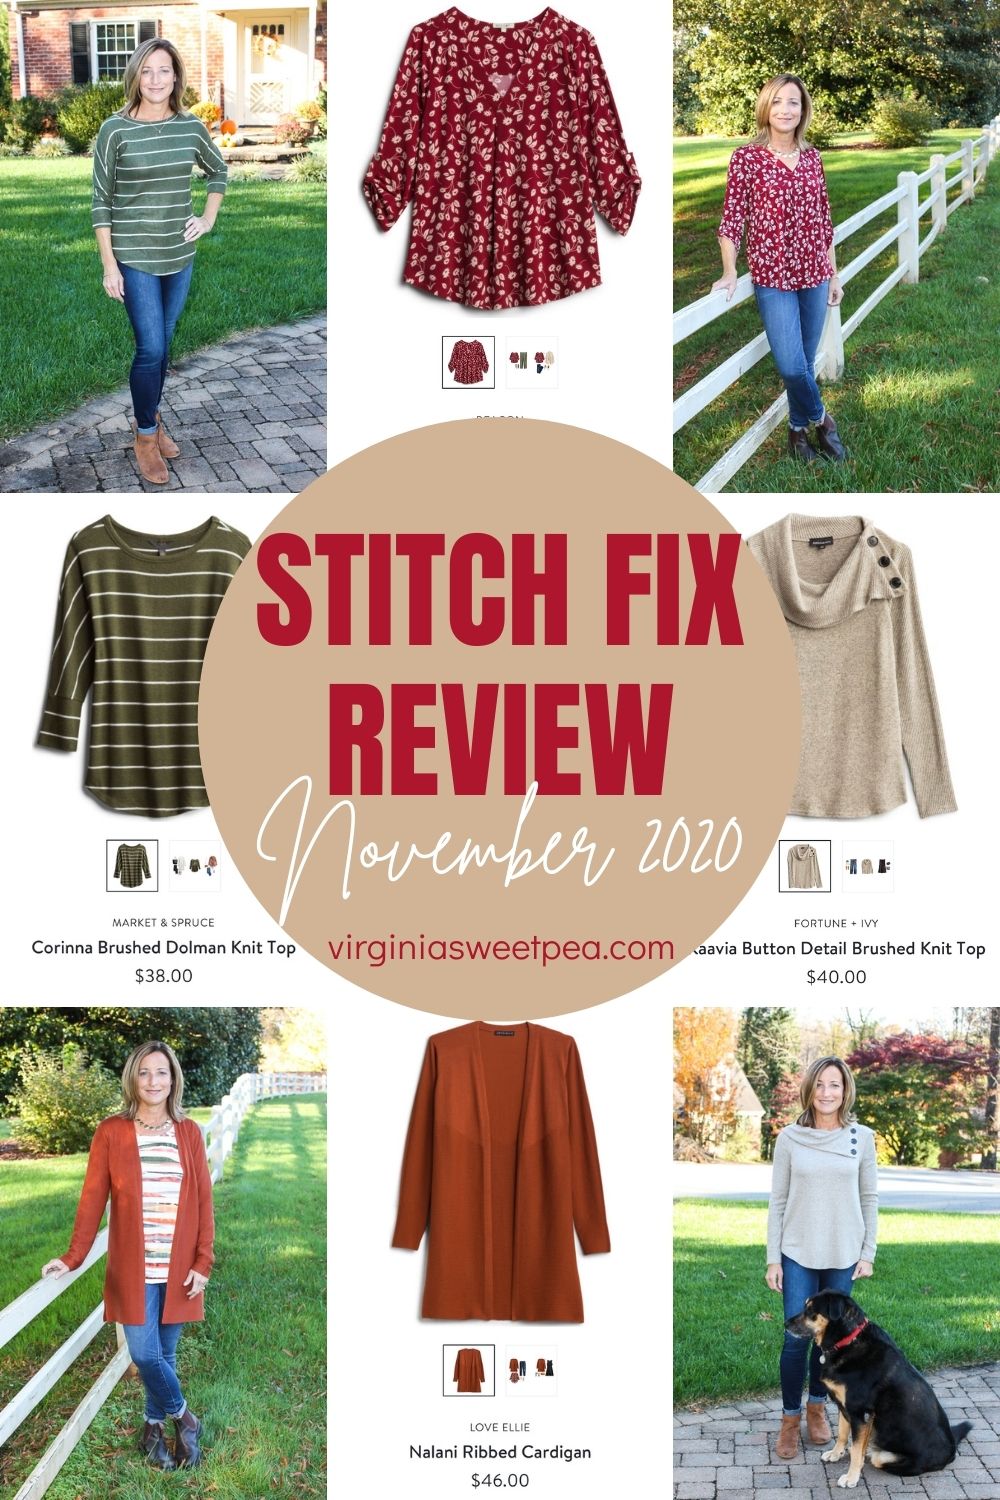 Stitch Fix Review for November 2020